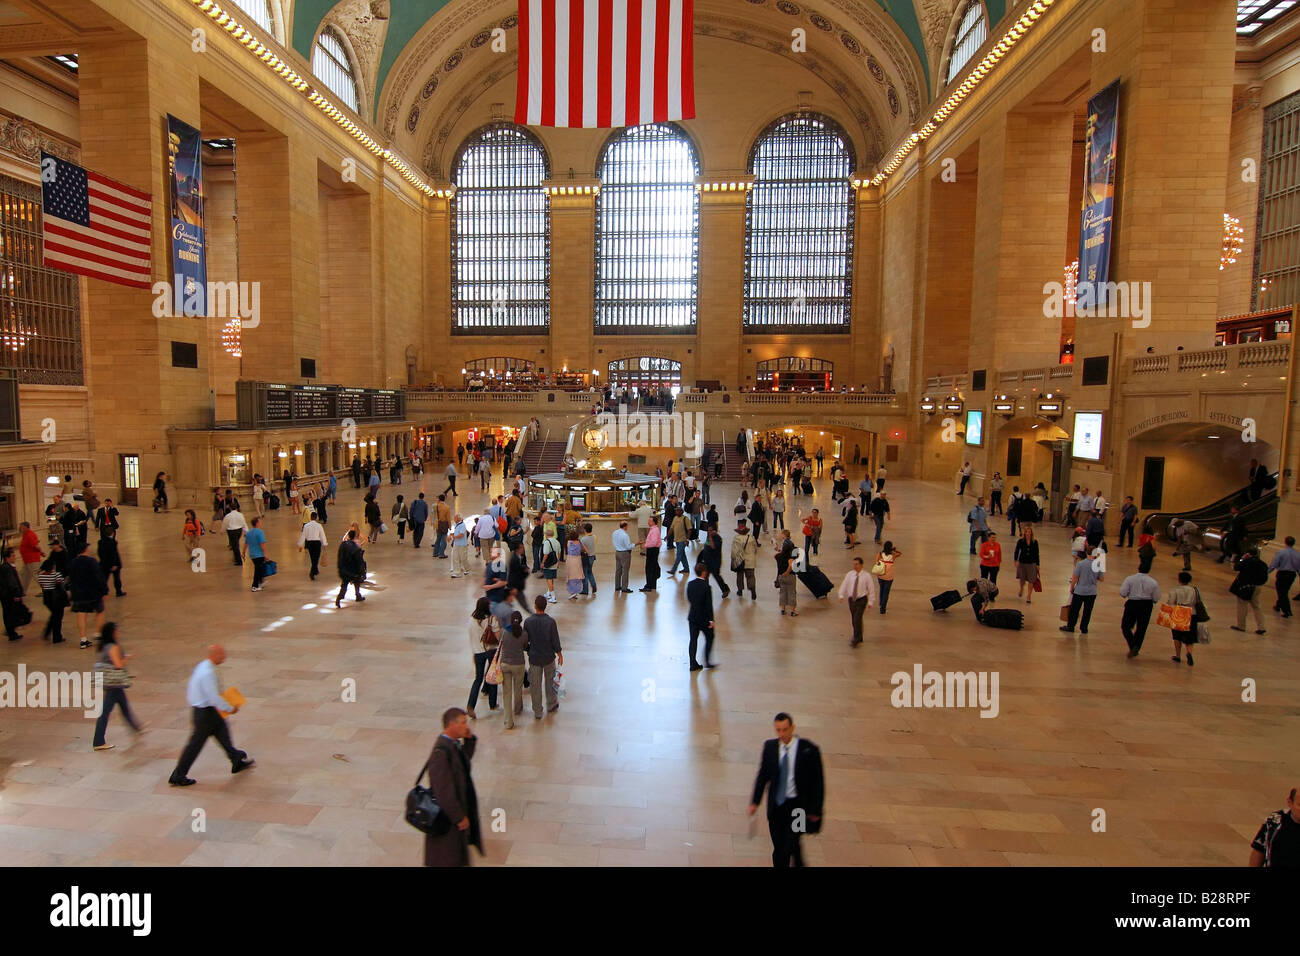 Passengers walking in Grand Central Terminal - New York City, USA Stock Photo